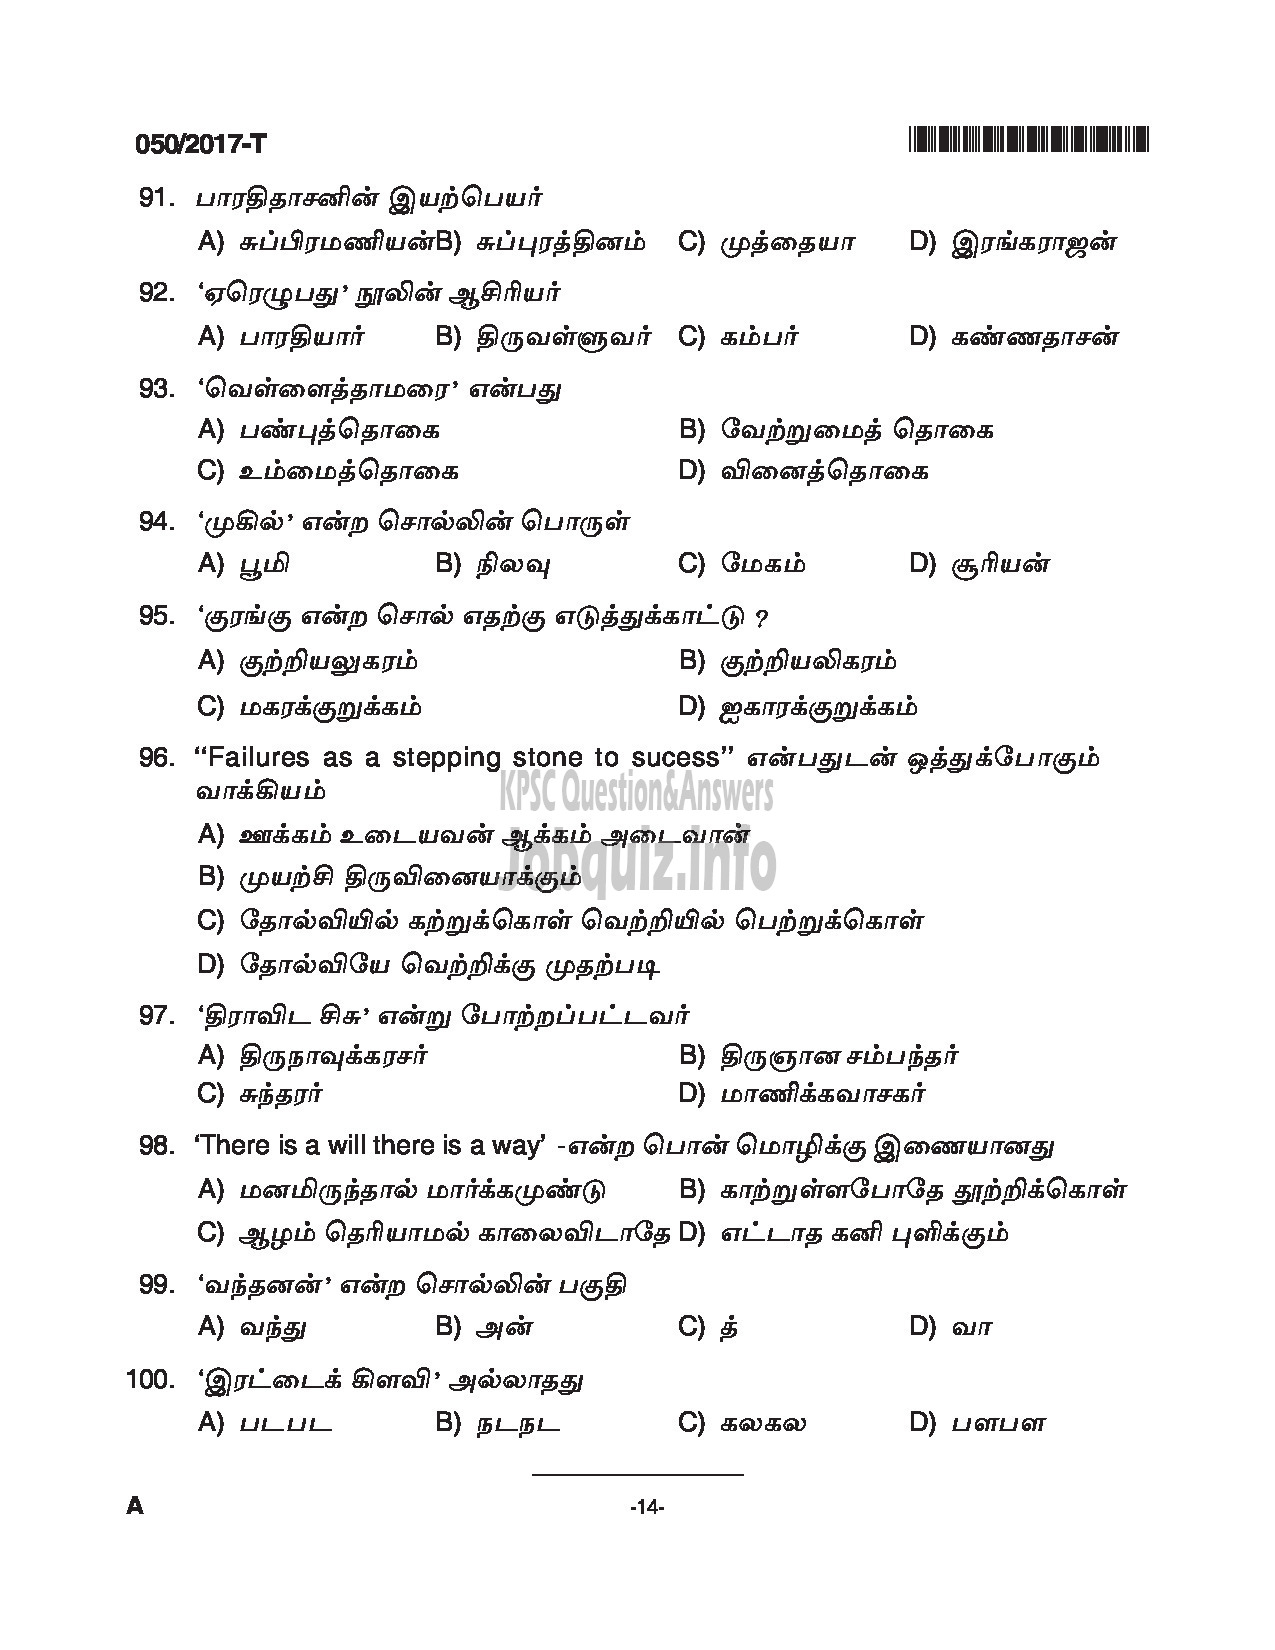 Kerala PSC Question Paper - LDC SR FOR SC/ST, SR FROM DIFFERENTLY ABLED CANDIDATES CAT.NO 122/16, 413/16 QUESTION PAPER(TAMIL)-14